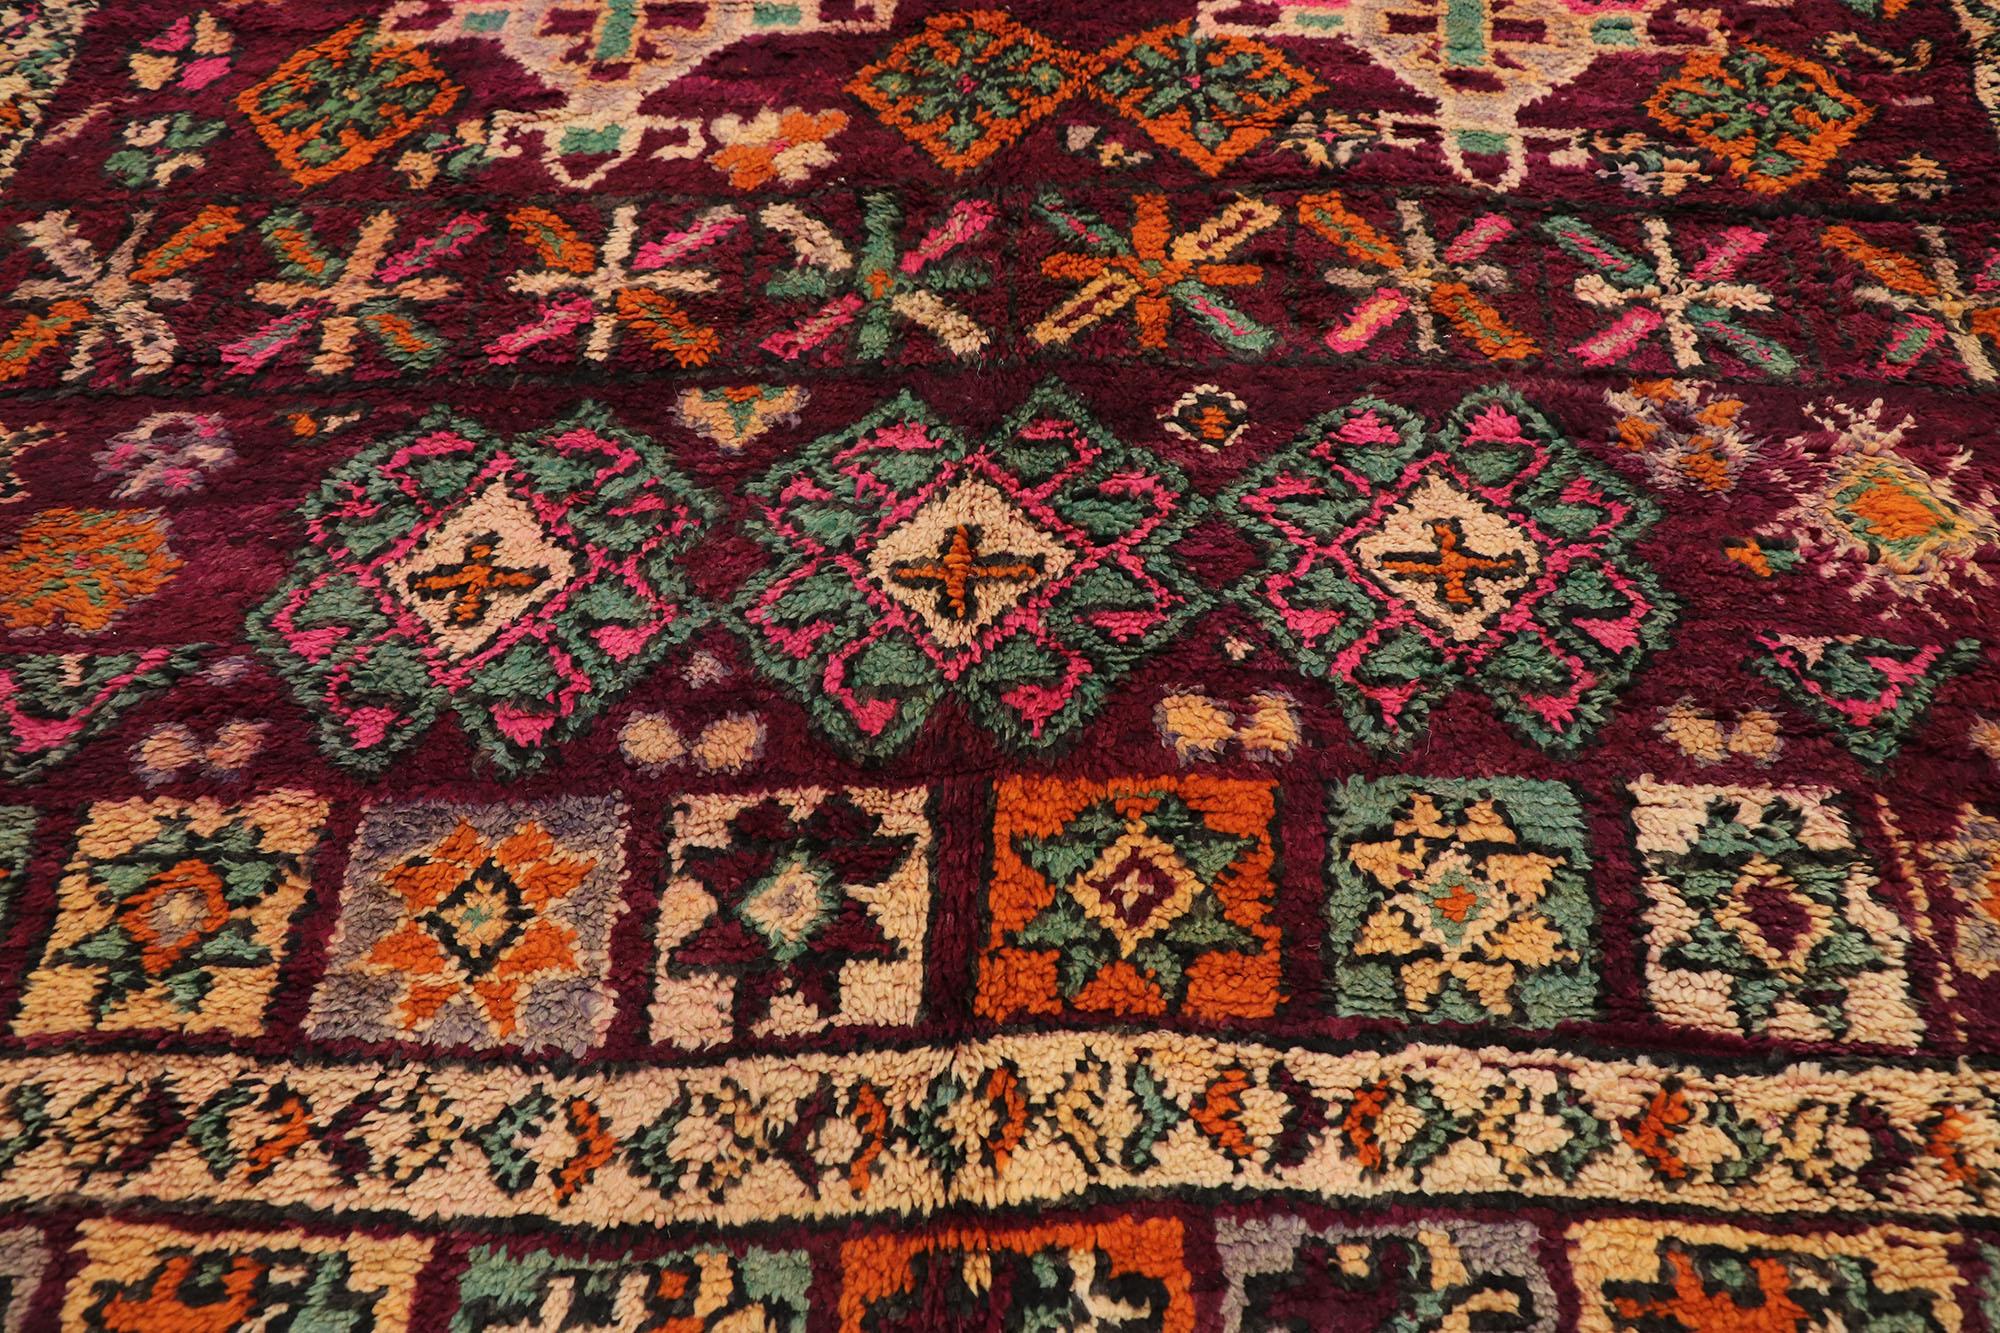 Vintage Berber Boujad Moroccan Rug with Bohemian Tribal Style In Good Condition For Sale In Dallas, TX